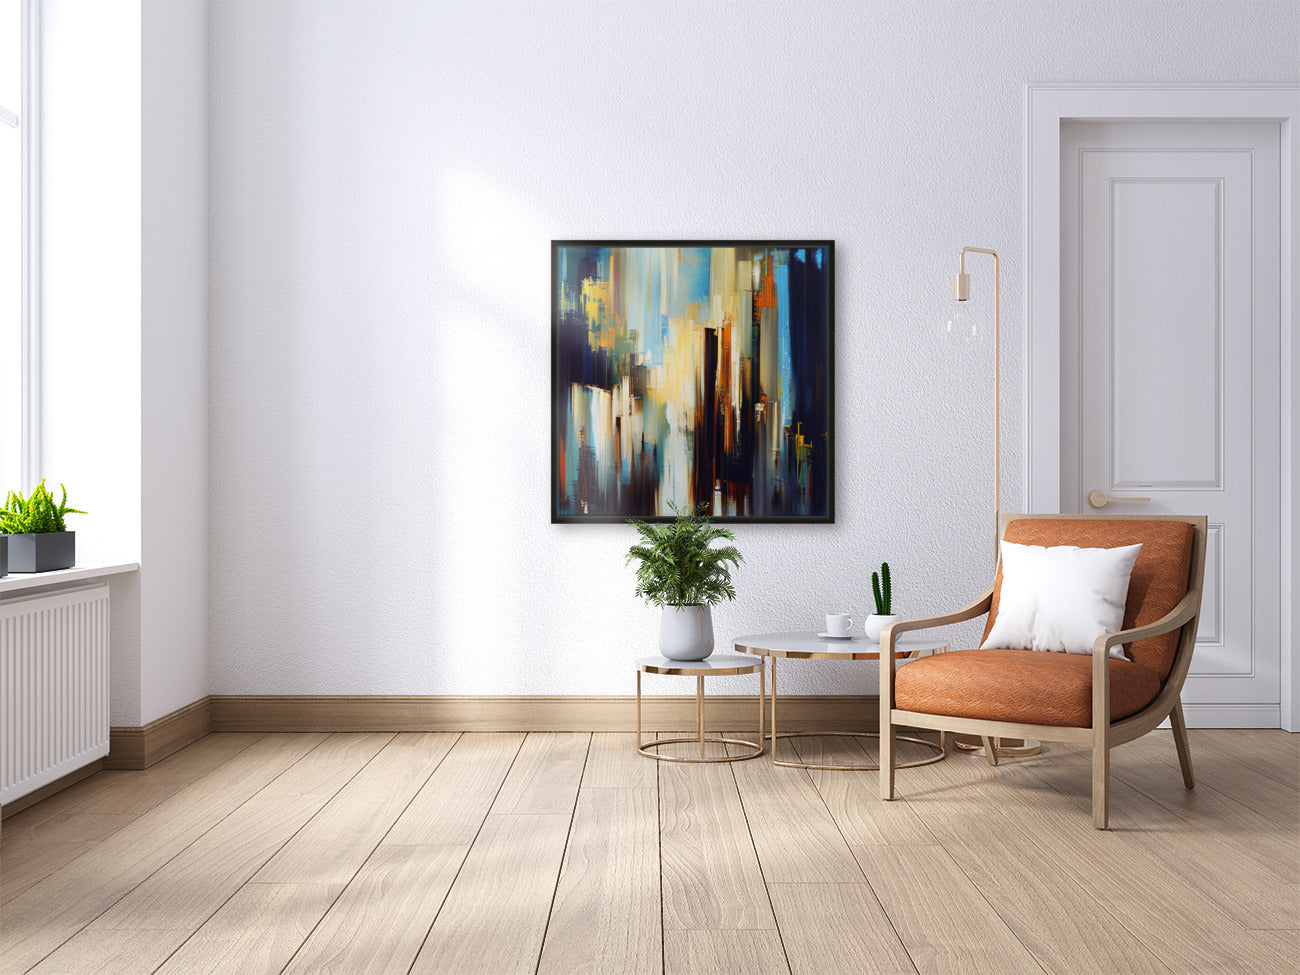 Vibrant Colors Emerging from Darkness on Modern Abstract Wall Art